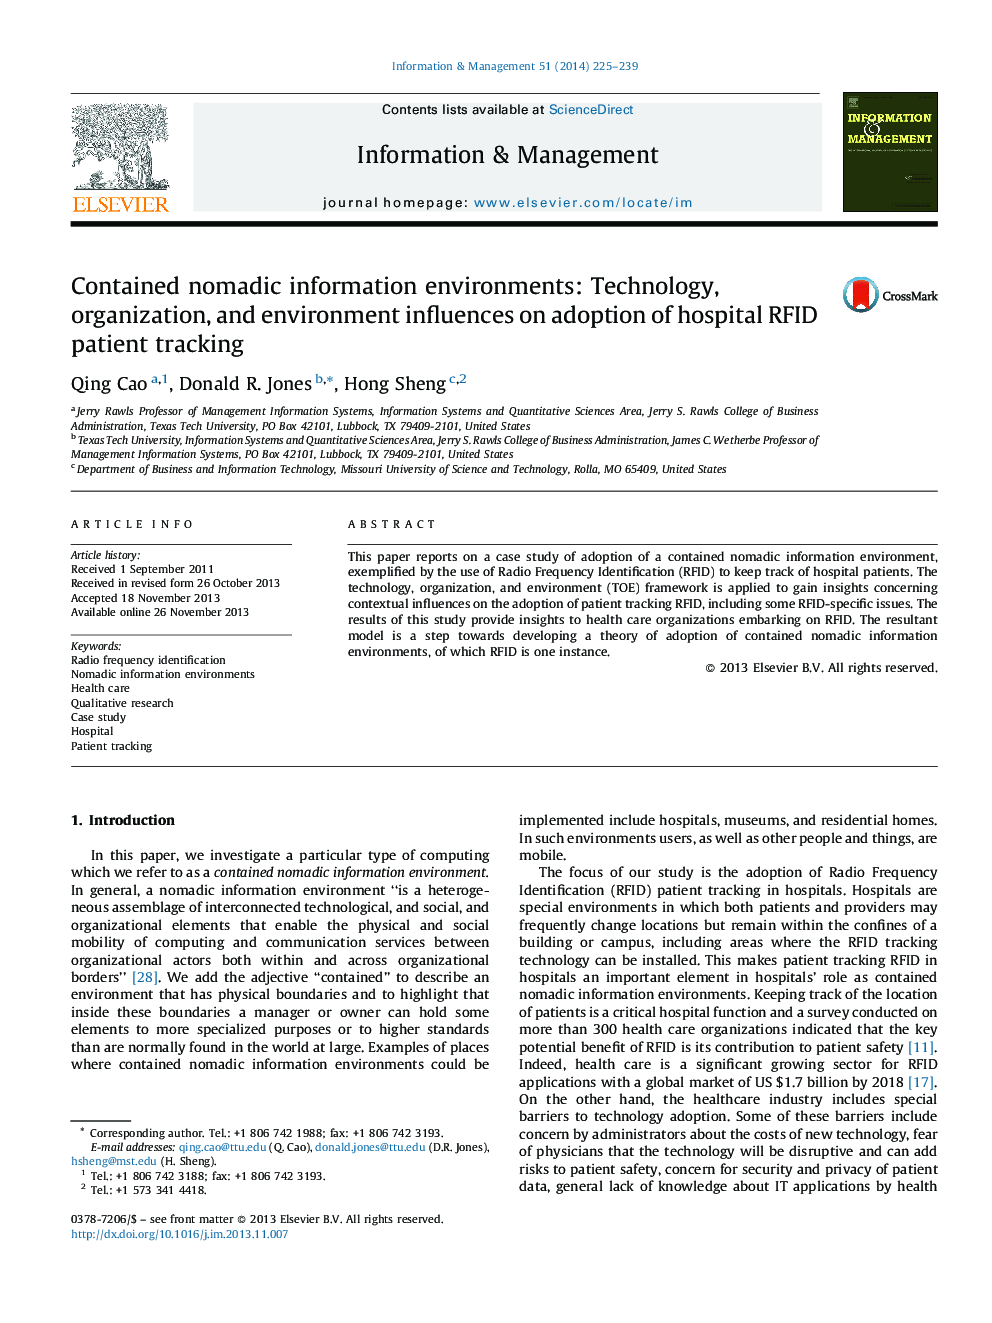 Contained nomadic information environments: Technology, organization, and environment influences on adoption of hospital RFID patient tracking